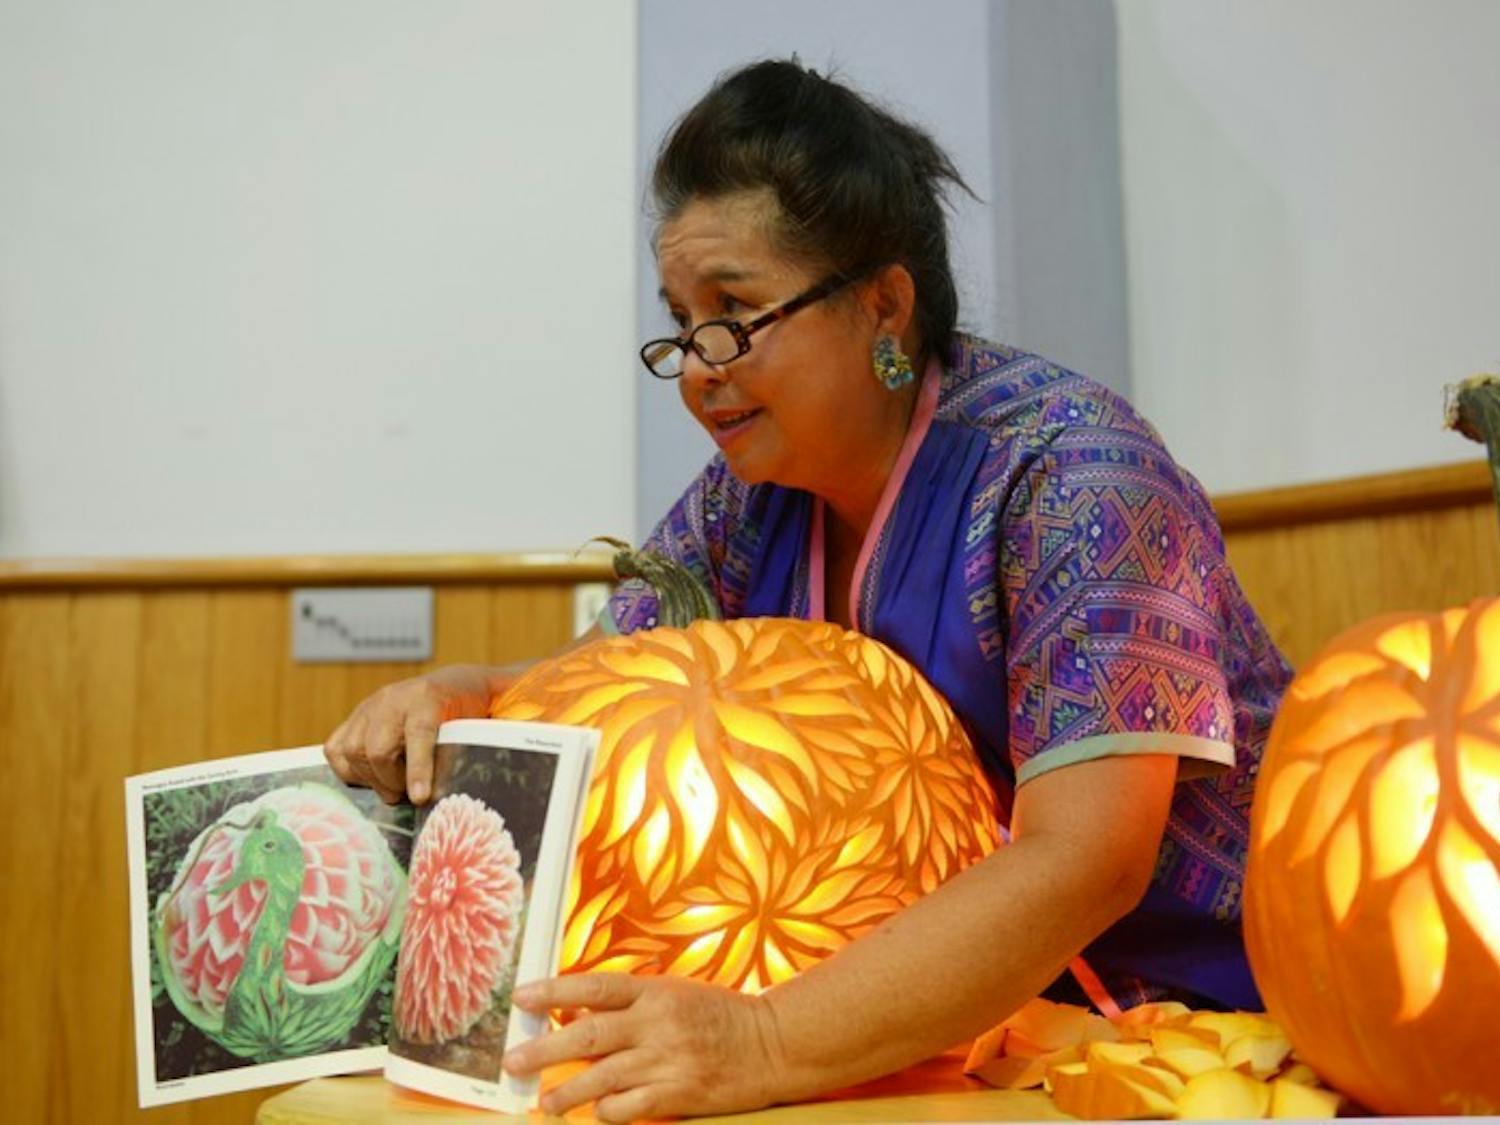 Kae-Sa-Luk Master Pam Maneeratana, 60, shows off her book, 'Messages Found with the Carving Knife', during a carving demonstration at the Alachua County Headquarters Library on Saturday. Maneeratana was trained by an instructor from the Royal Palace in Thailand as a child and has been carving professionally for over 30 years.